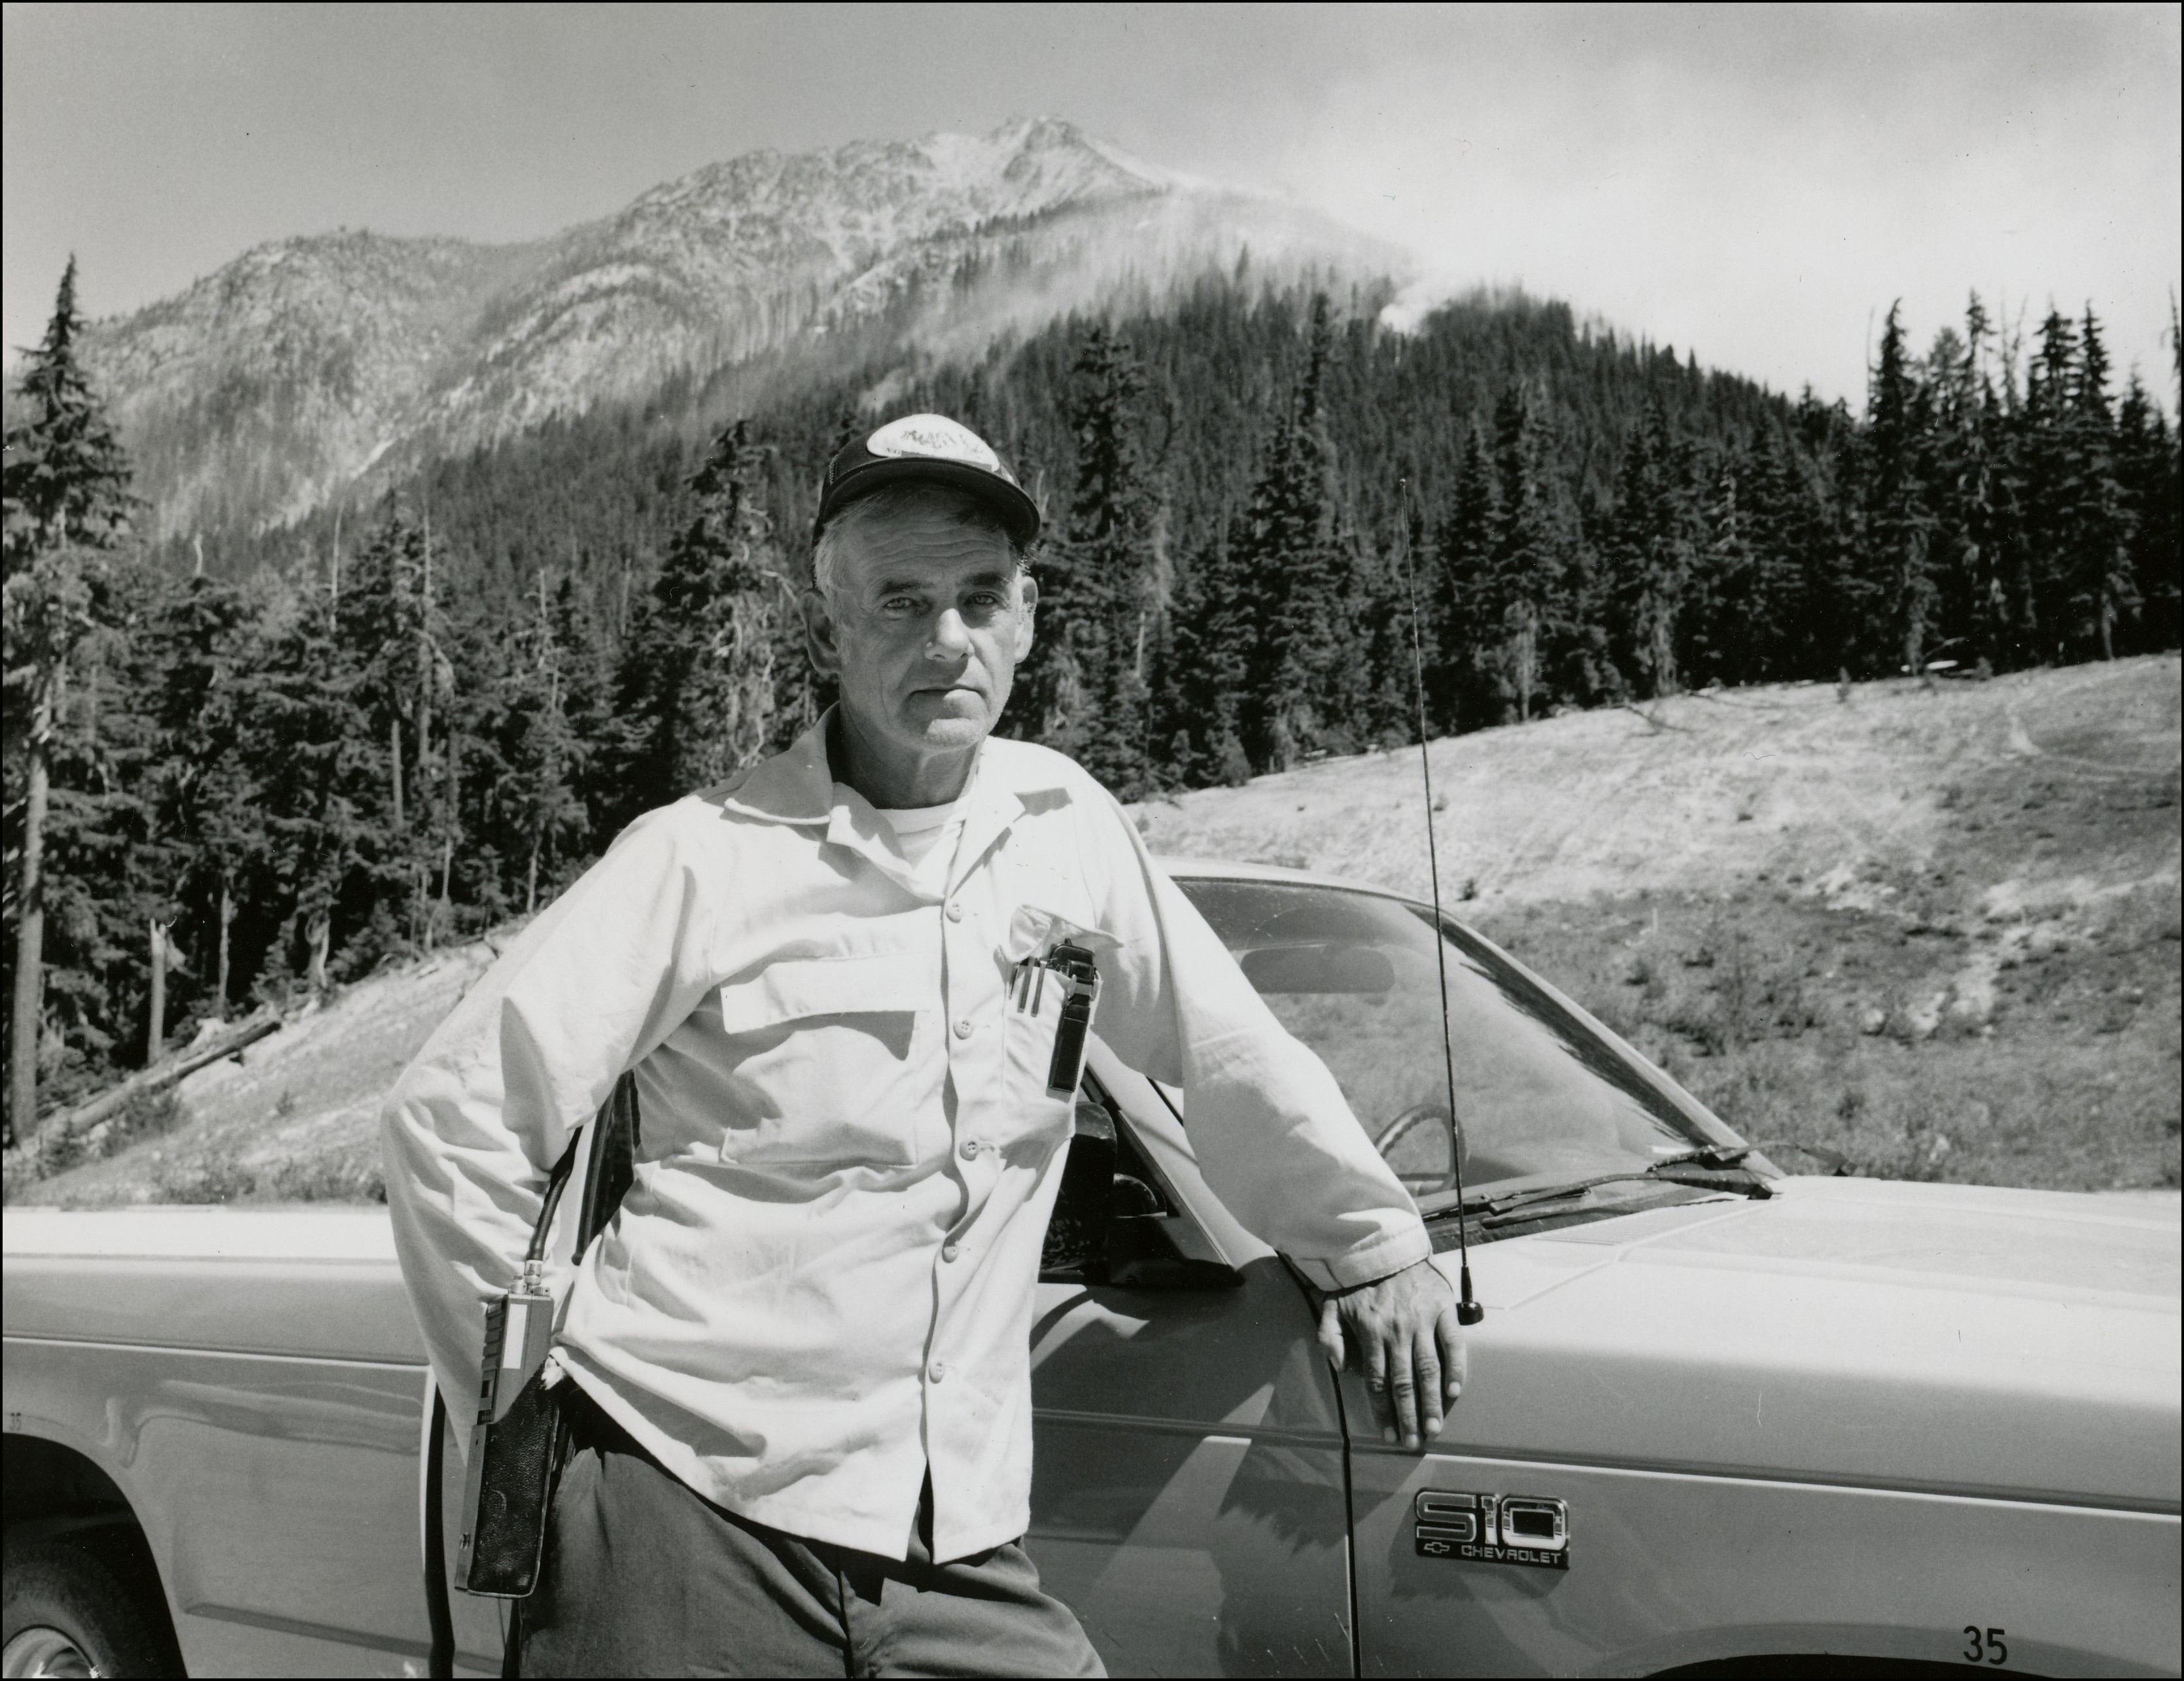 Man in baseball cap standing in front of his car with mountain in the background